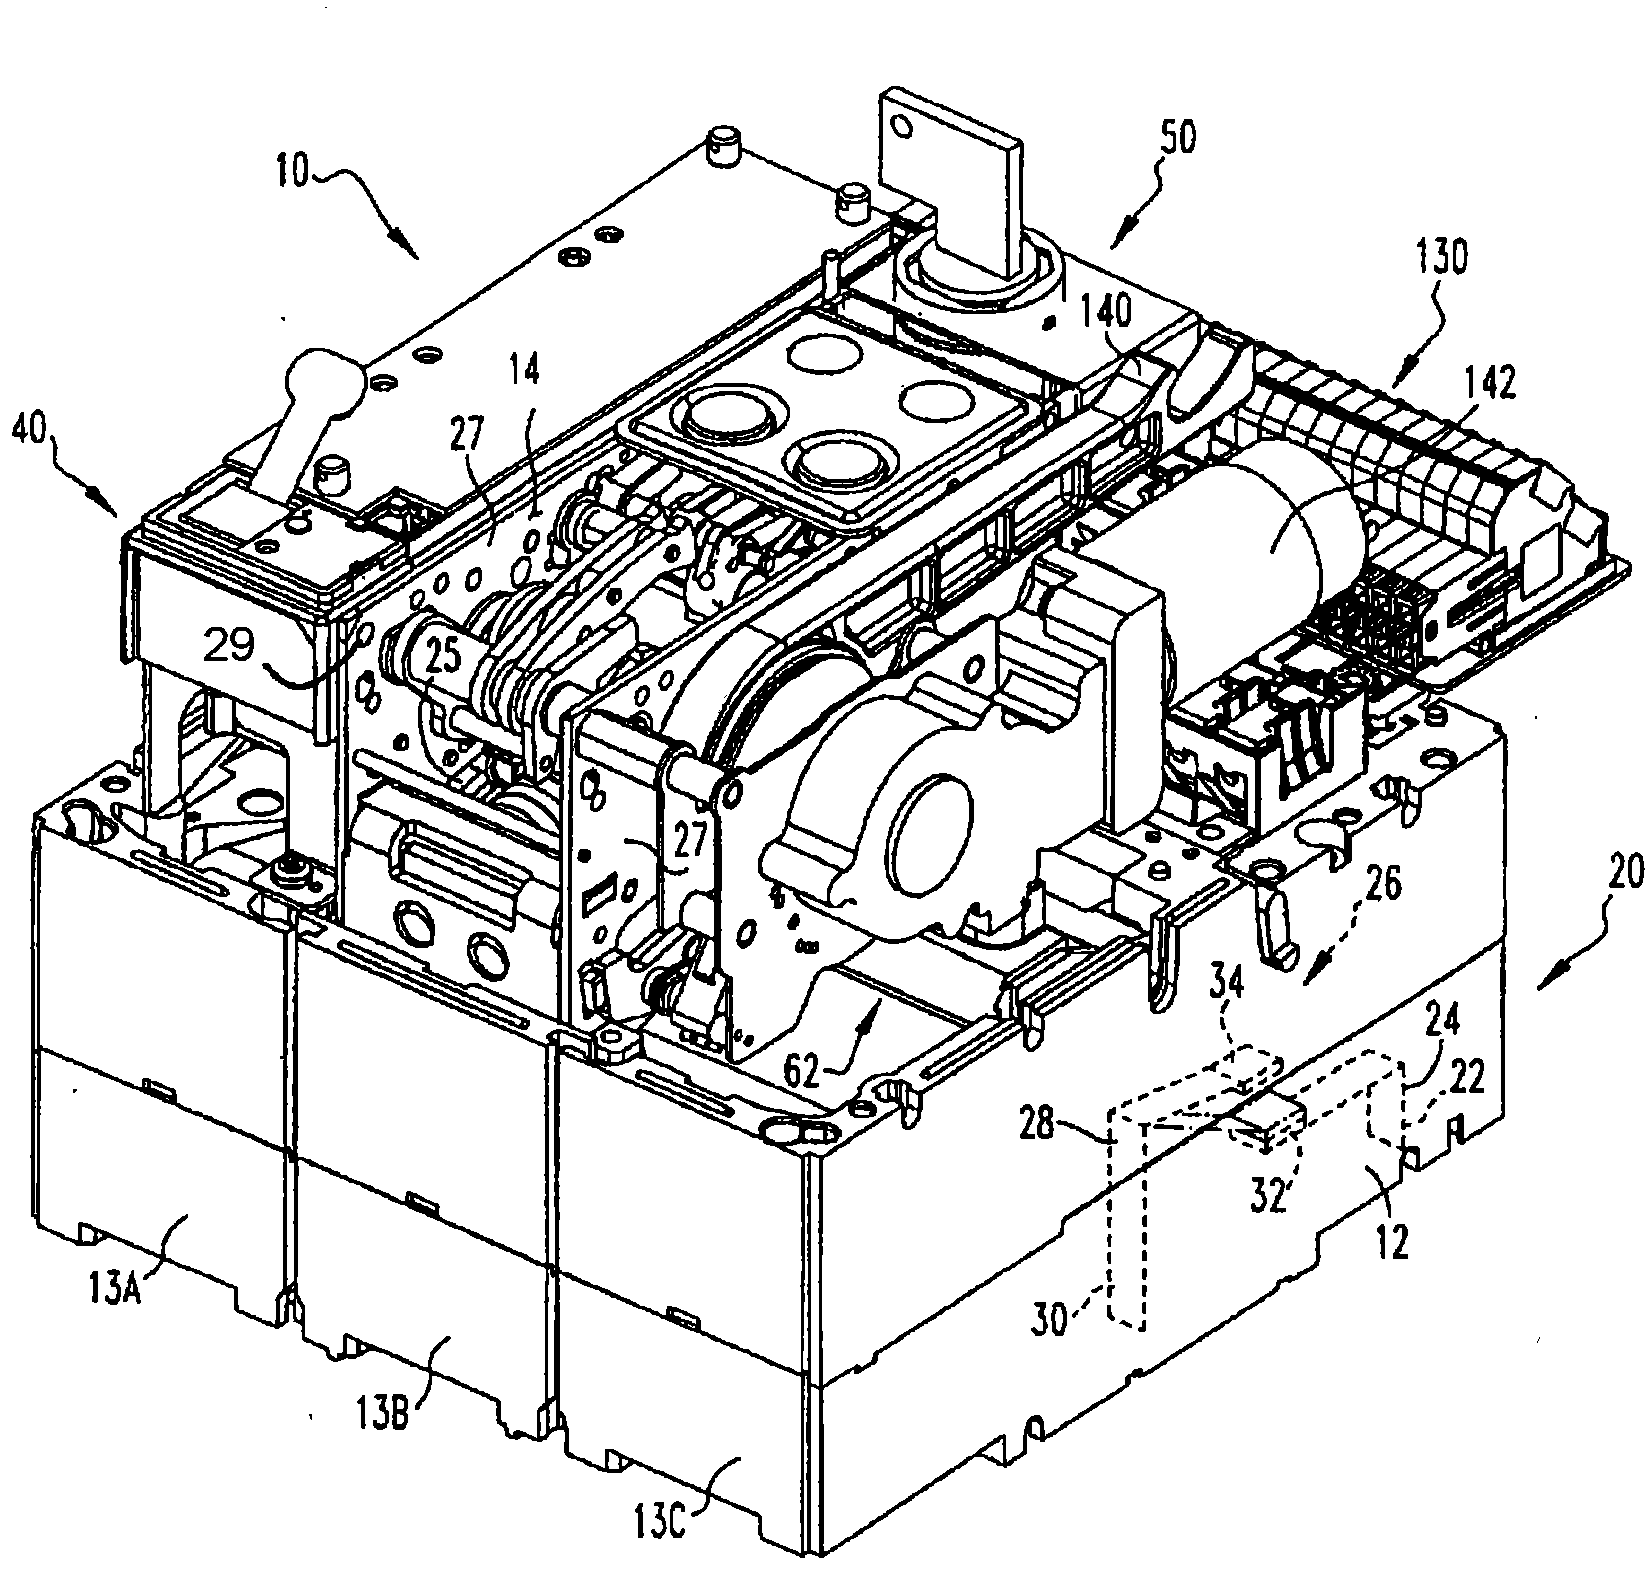 Electrical switching apparatus having a cradle with combined pivot and over-toggle reversing pin